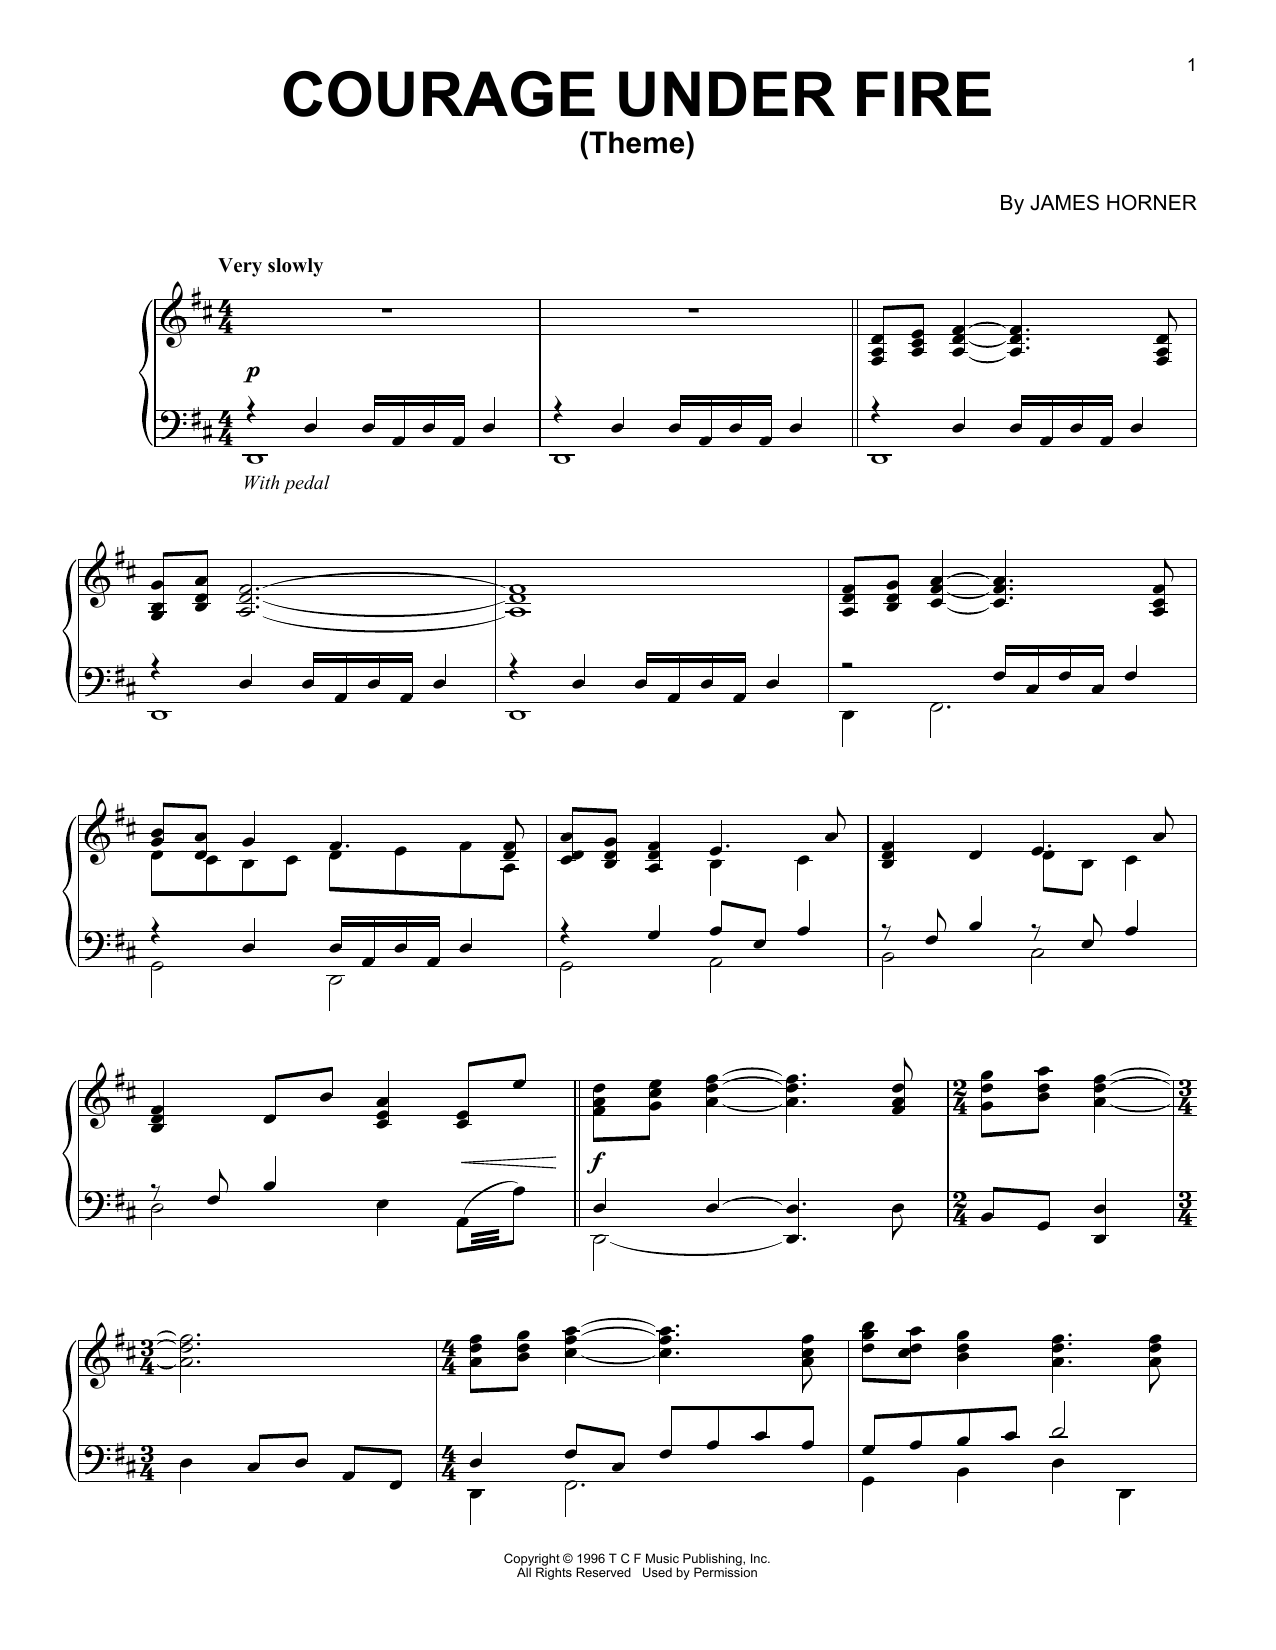 Courage Under Fire (Theme) sheet music